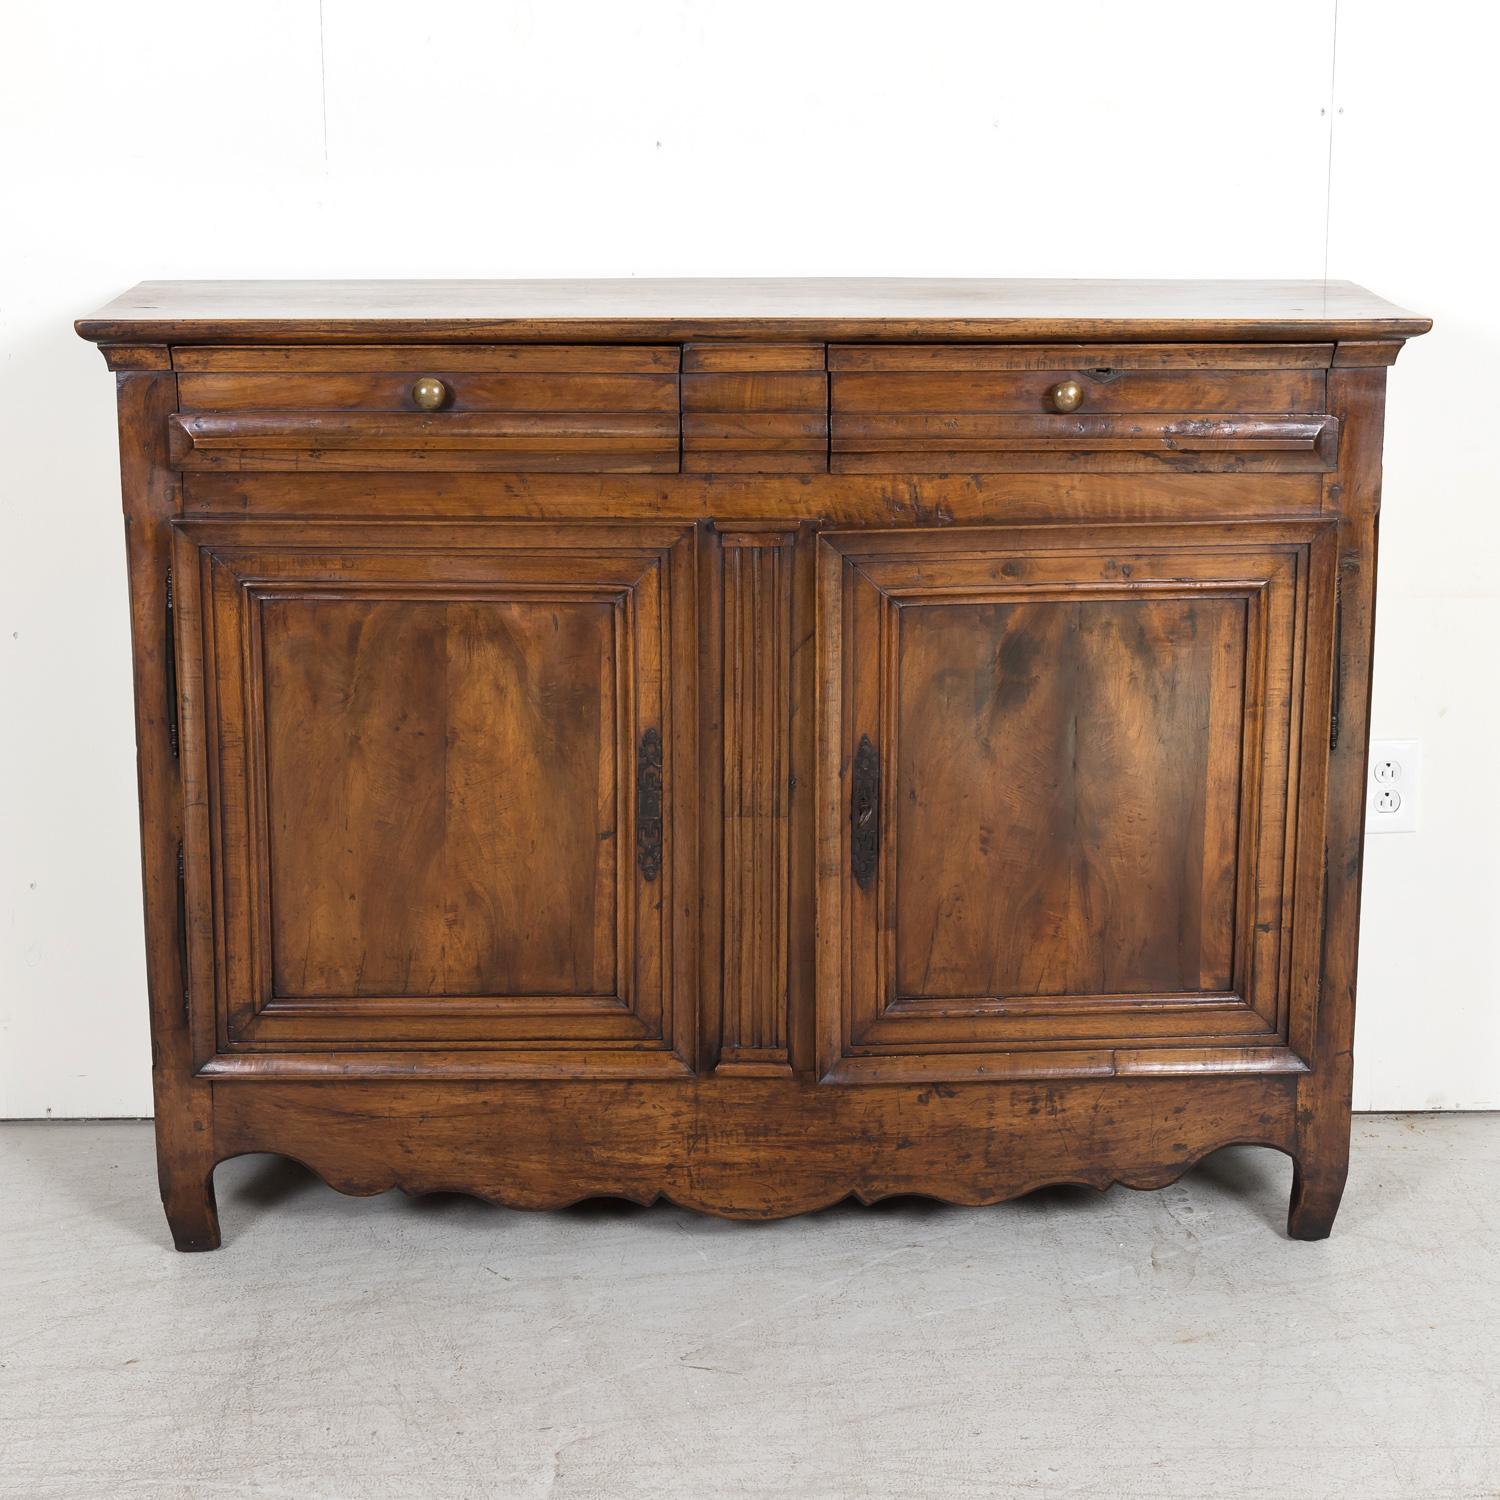 A handsome 18th century French Louis XV-Louis XVI Transition period solid walnut buffet d'appui or gentleman's buffet handcrafted by skilled artisans from Lyon during the French Transition period (1750-1775), having a rectangular plank top that sits